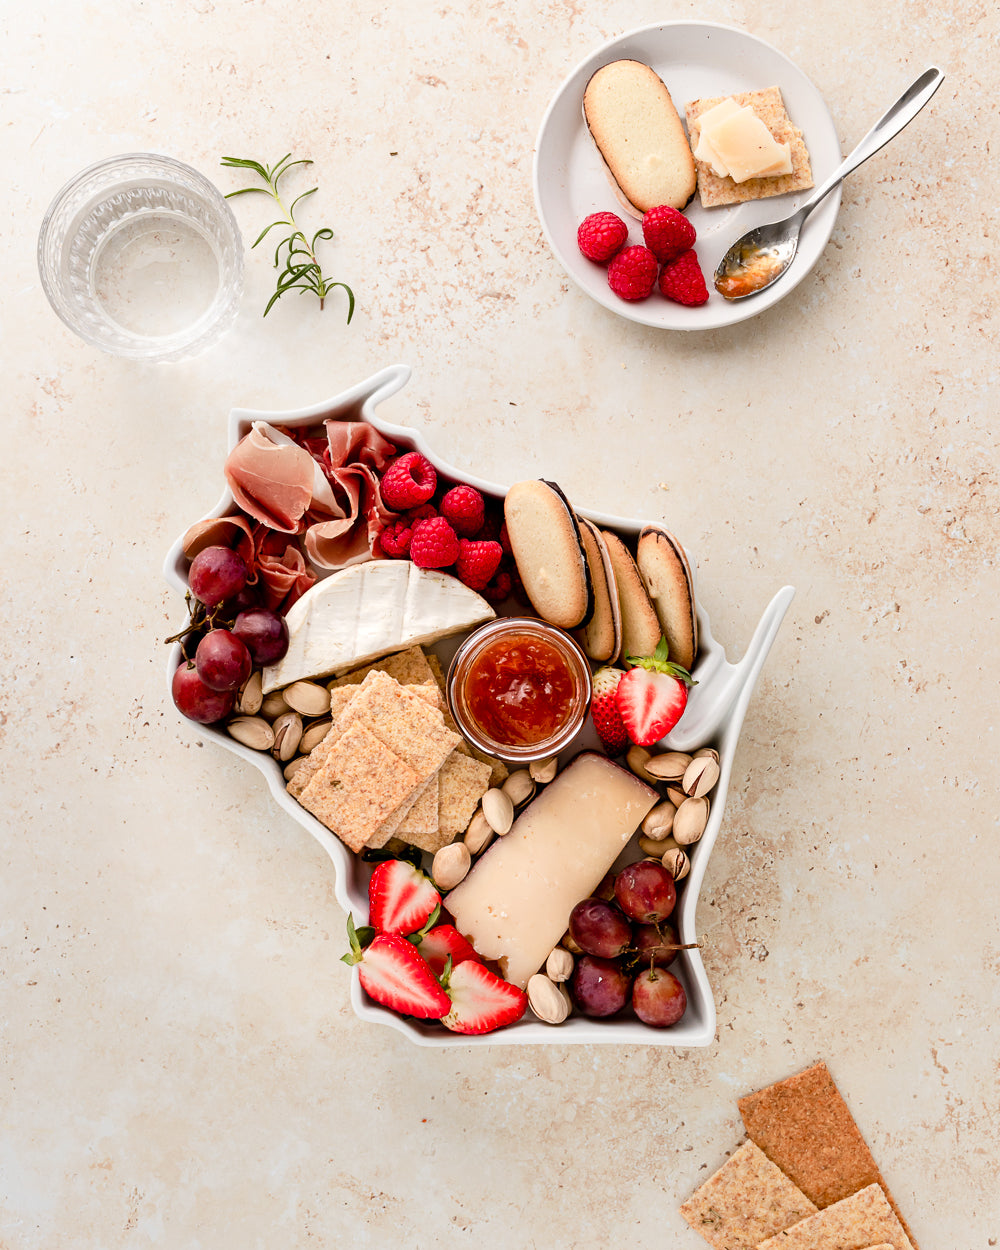 Wisconsin state plate charcuterie board. Wisconsin state plate cheese board. WI charcuterie board. WI meat and cheese board. WI meat and cheese tray. WI meat and cheese plate. WI appetizer tray. WI kitchen gift. WI baking gift. WI cooking gift.